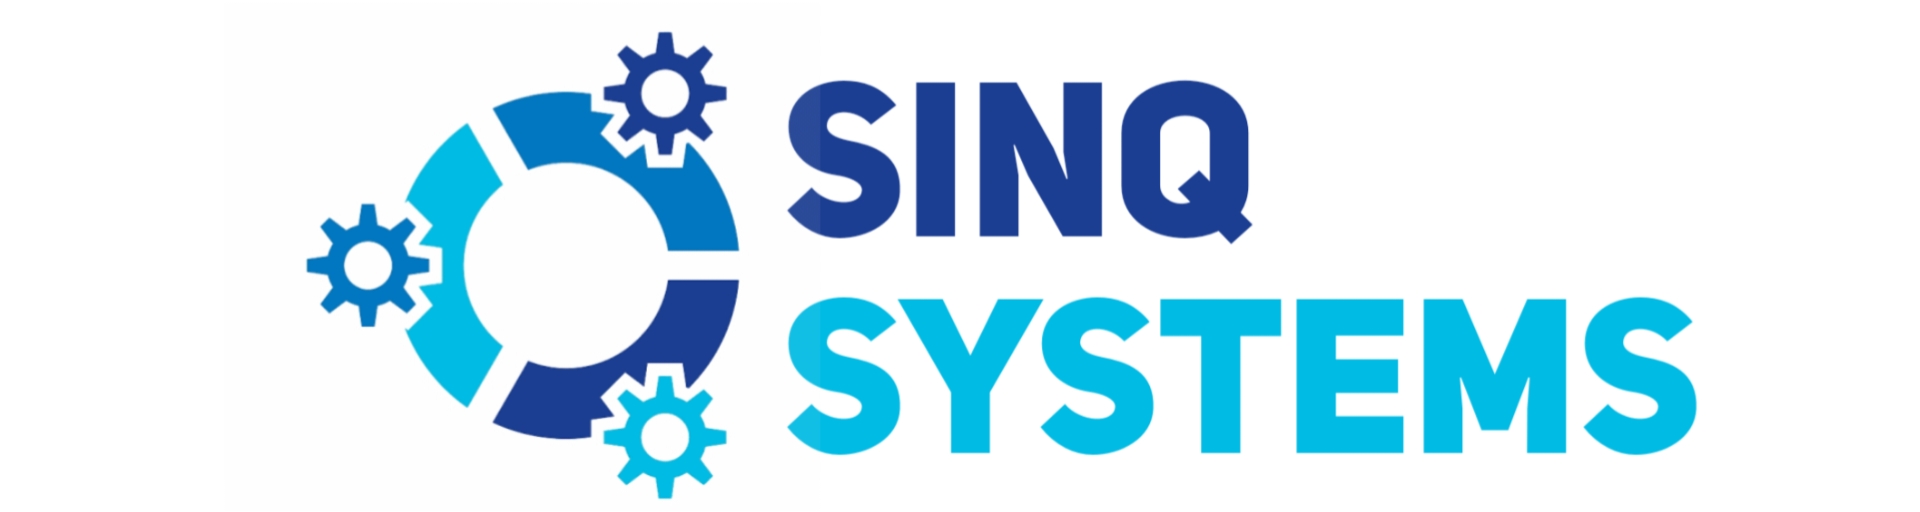 sinq-systems